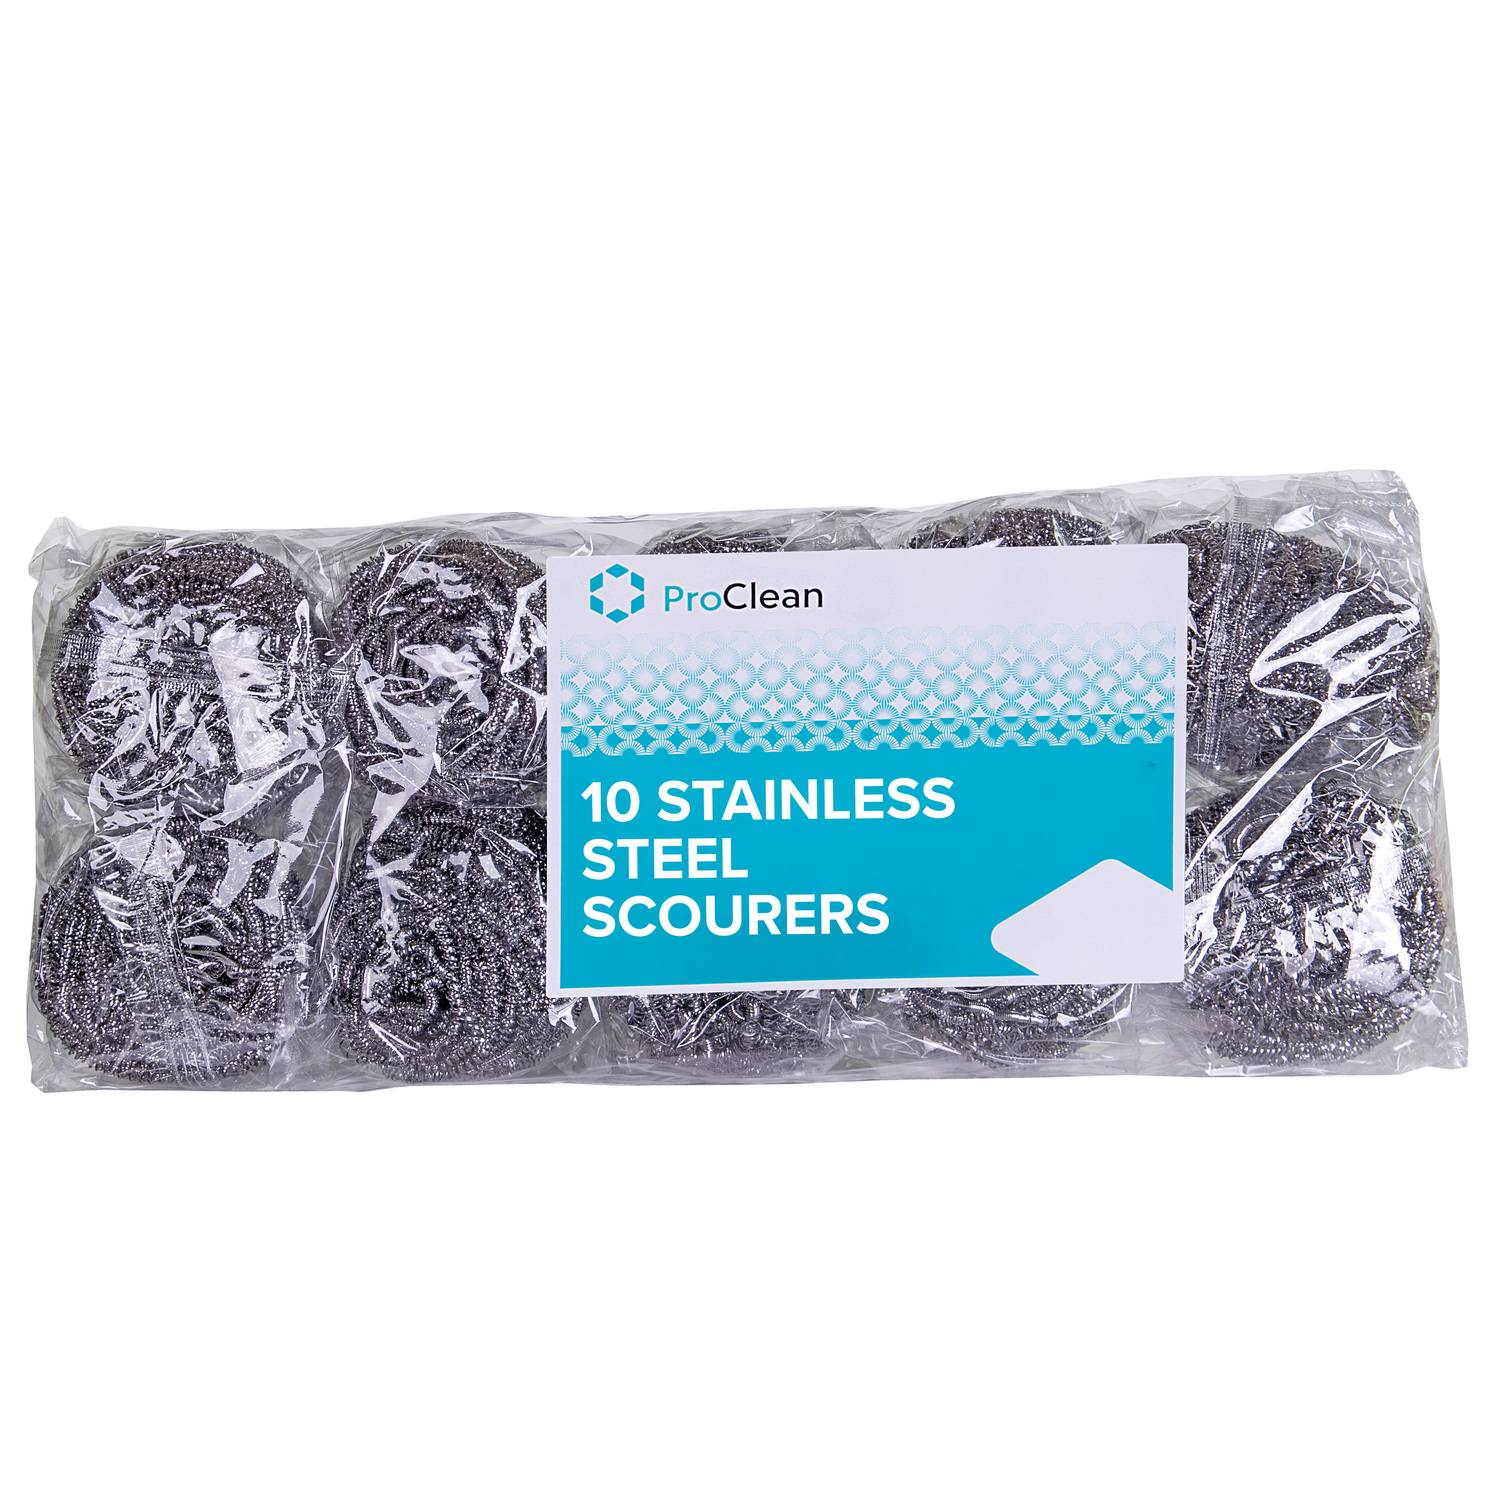 ProClean 10 Stainless Steel Scourers (40g) (10 x 10)